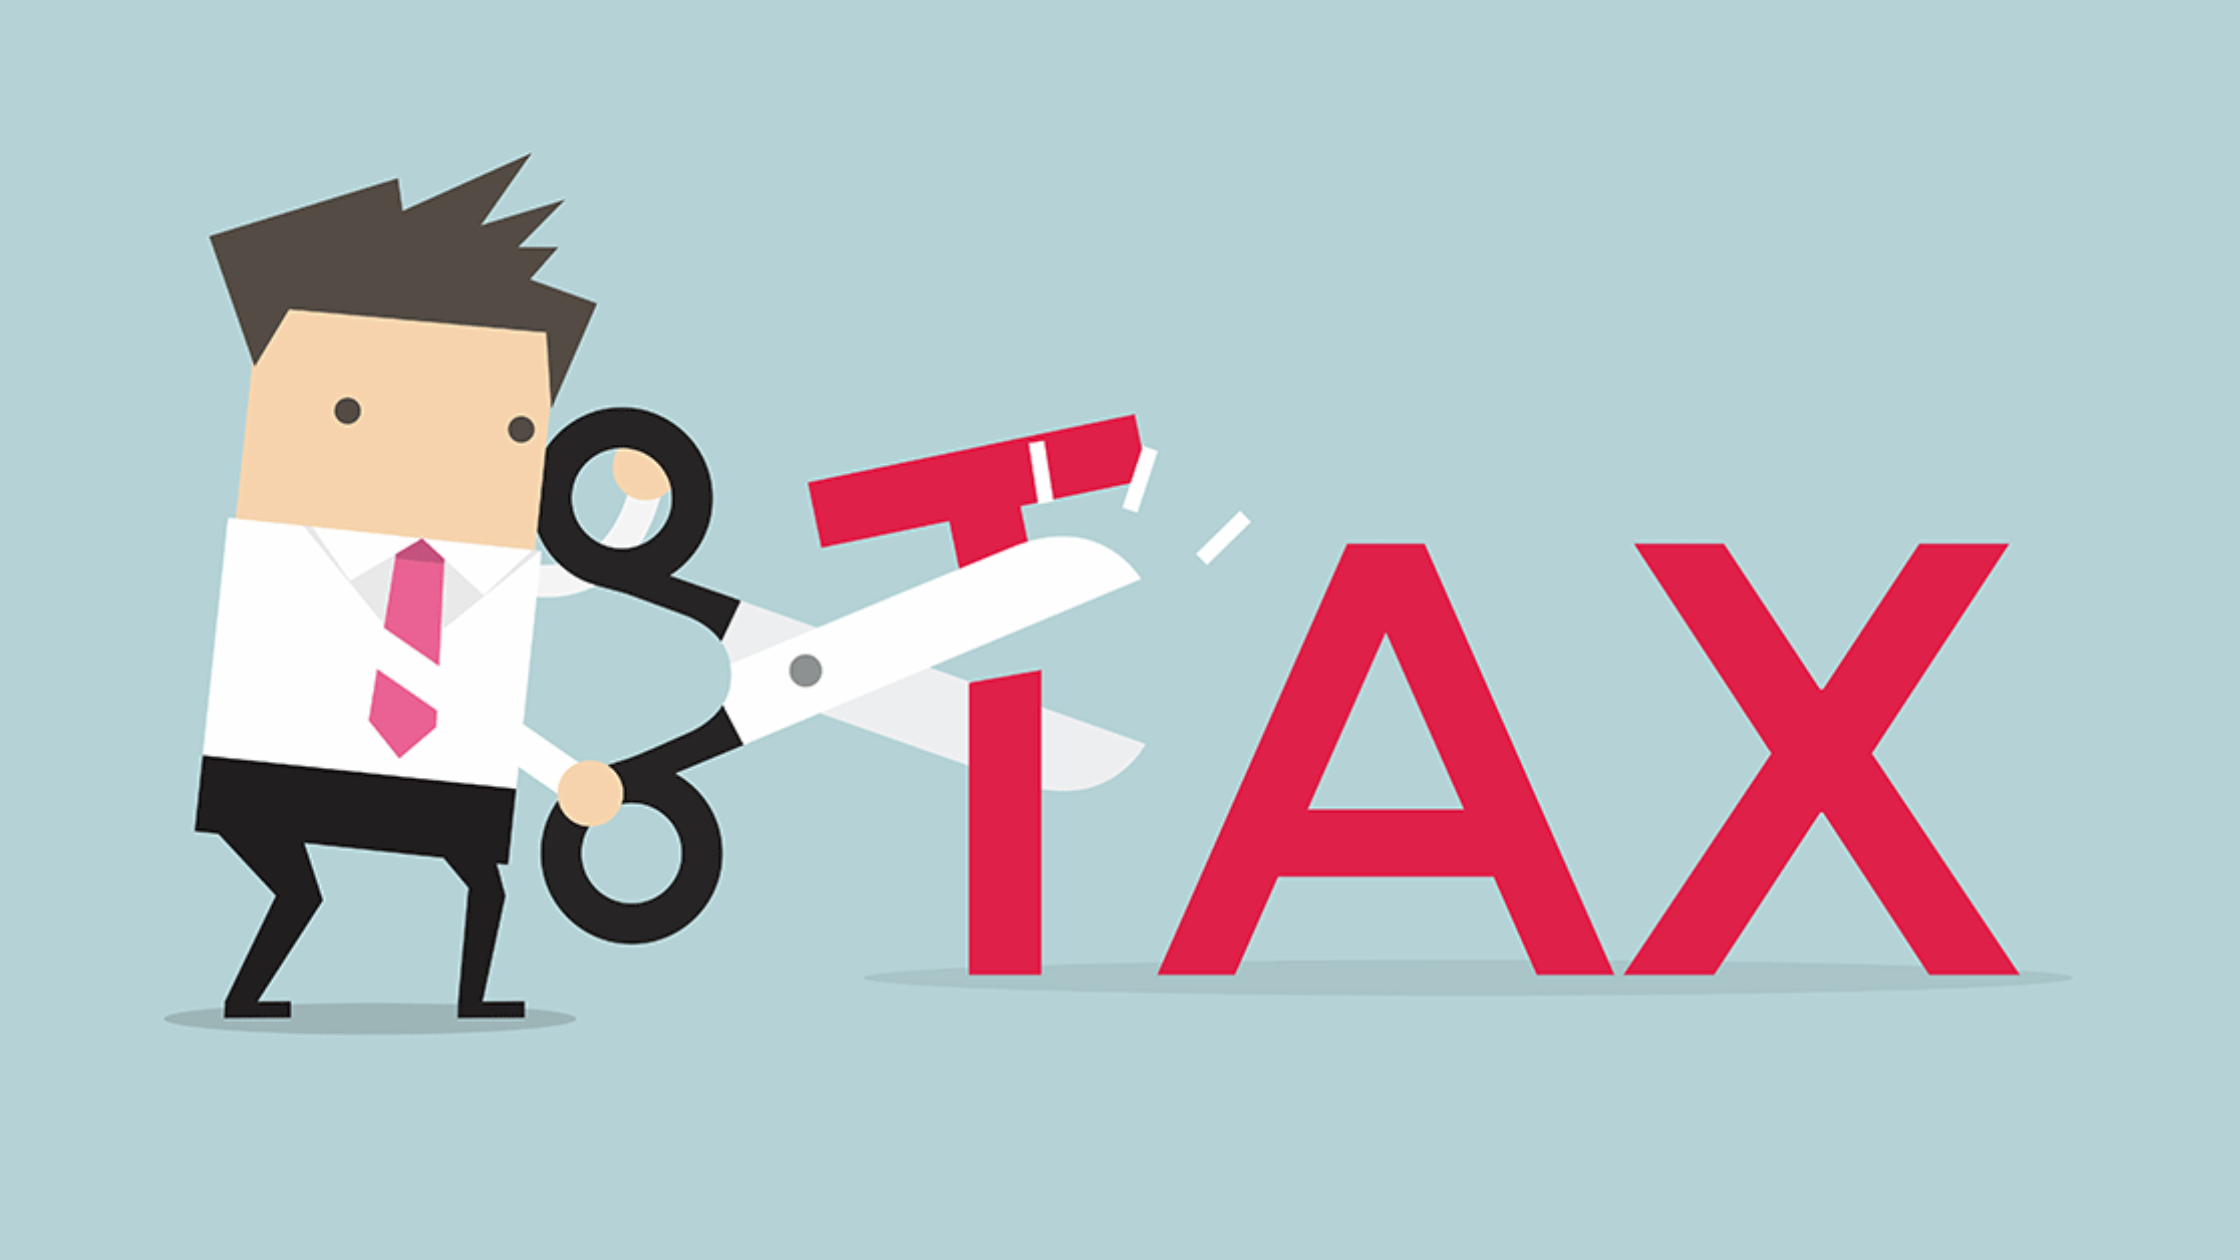 An illustrated image of a cartoon man using giant scissors to cut the "T" in the word "Tax"